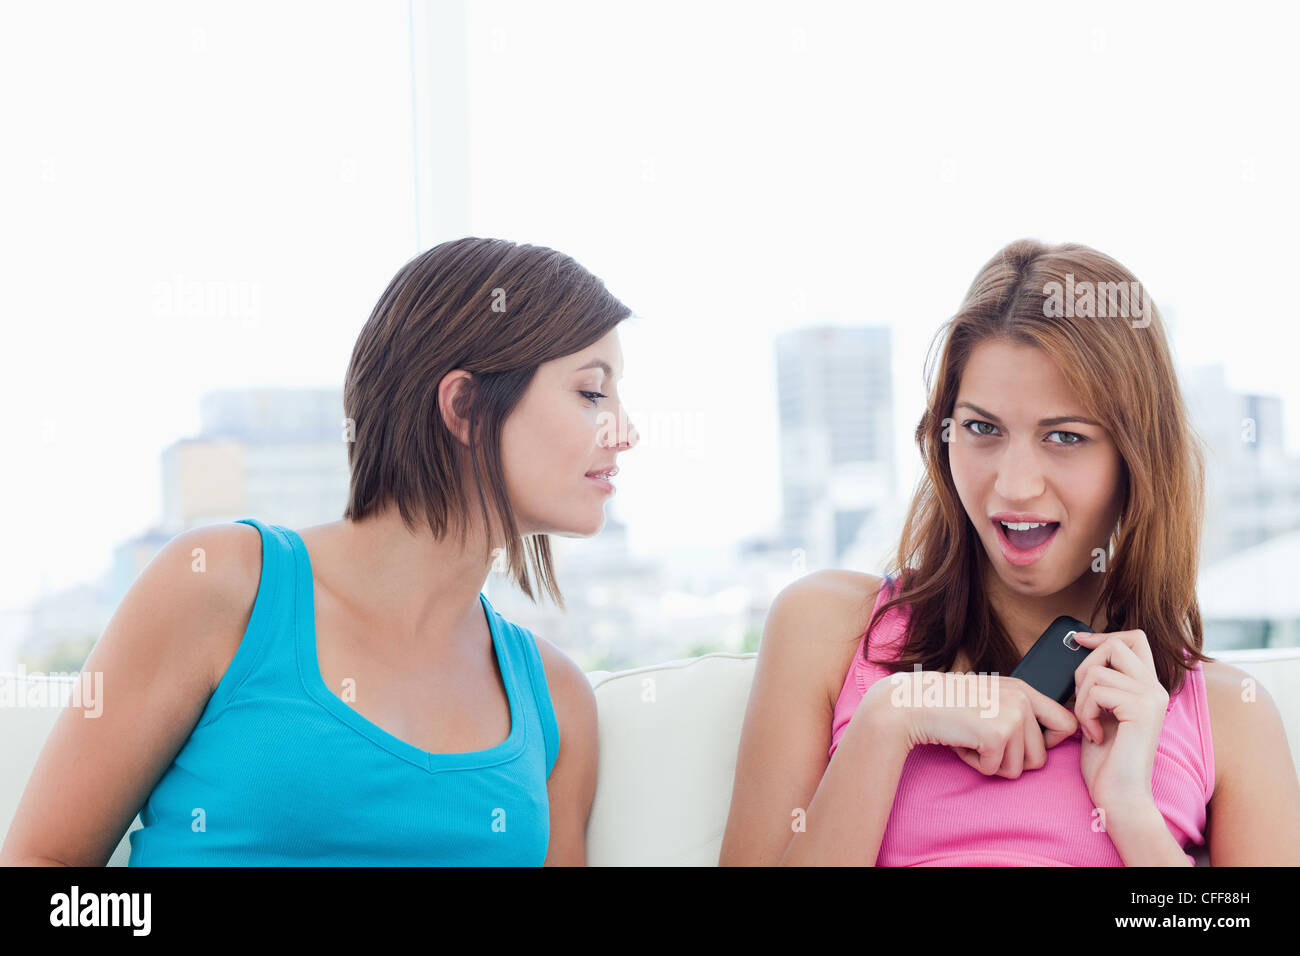 Woman trying to look at a mobile phone hidden by her friend Stock Photo